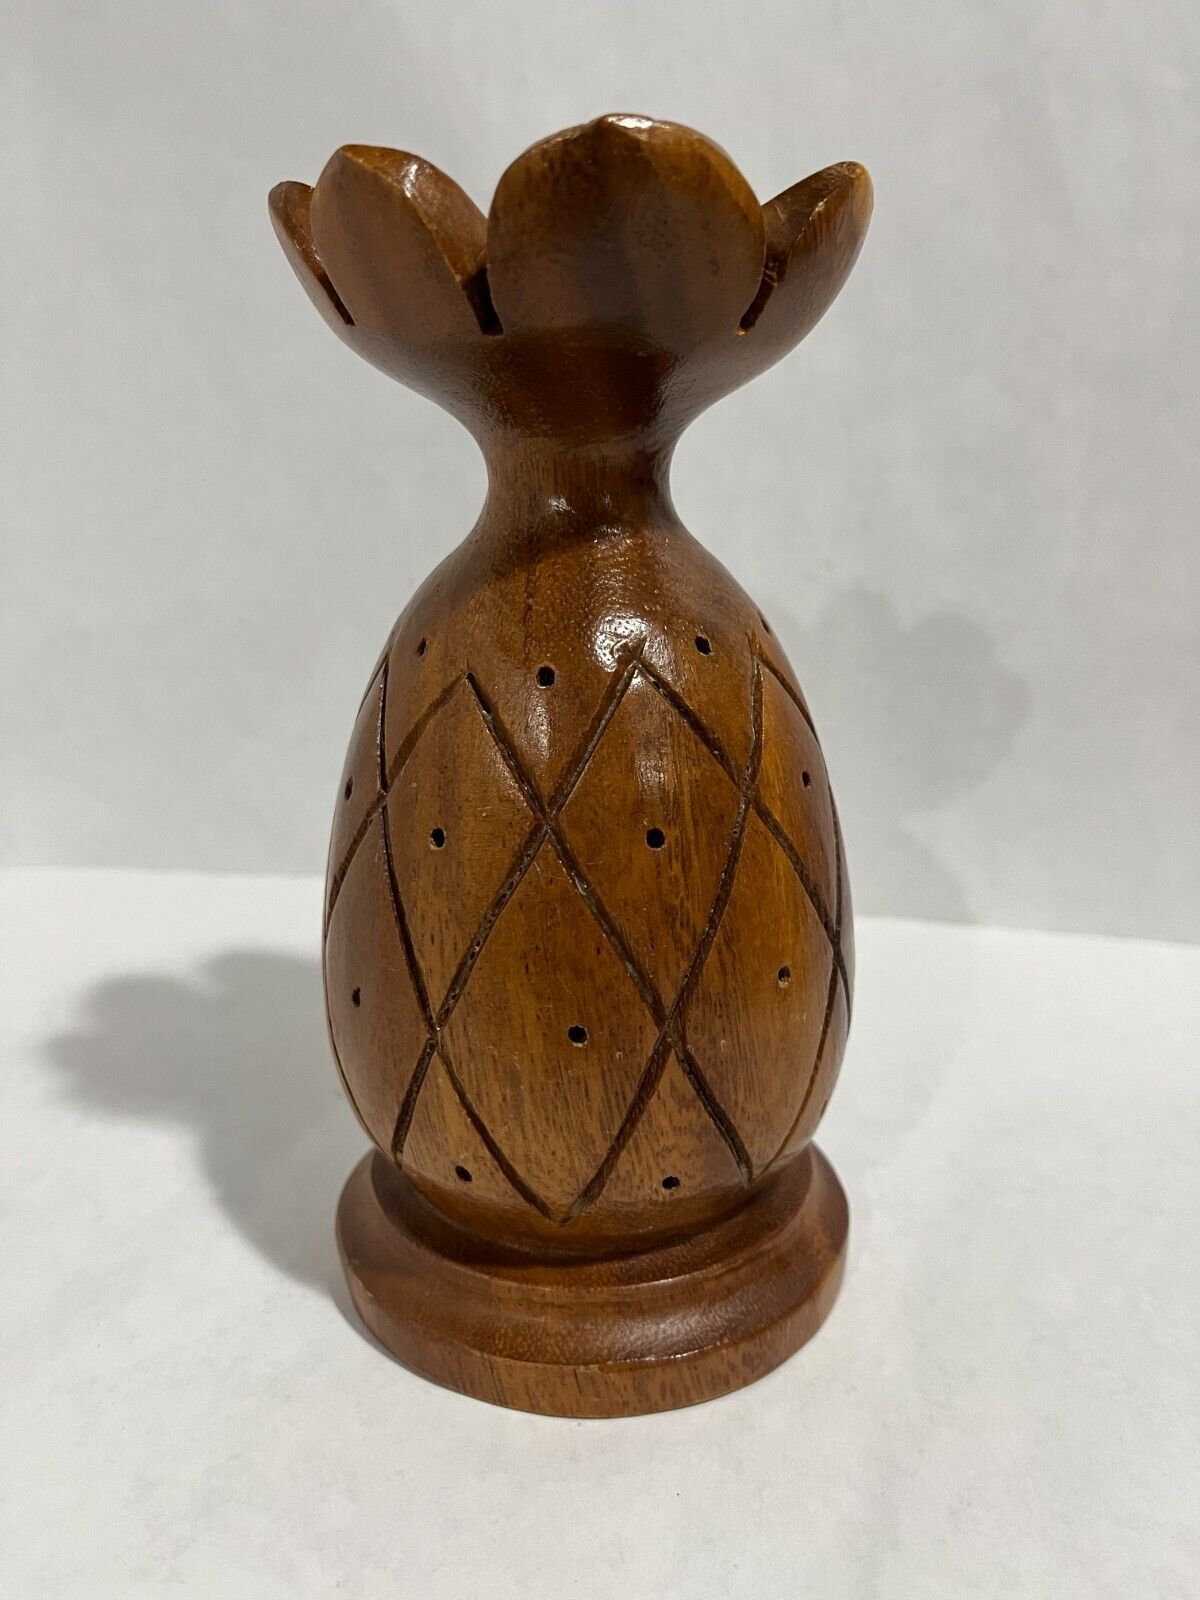 Vintage Carved Wooden Pineapple, Philippines, shows some wear